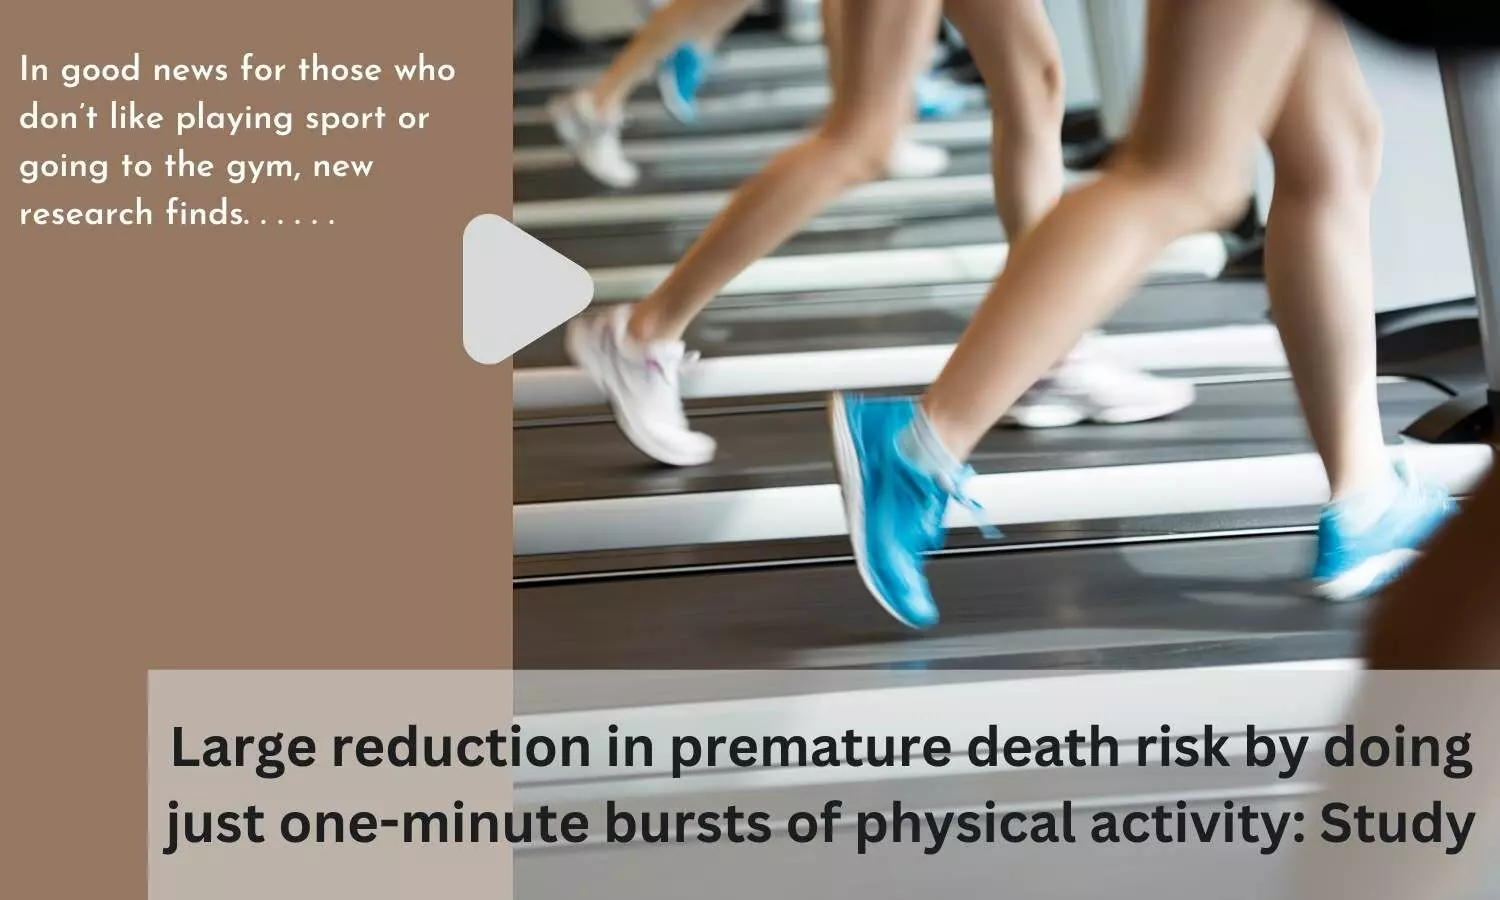 Large reduction in premature death risk by doing just one-minute bursts of physical activity: Study